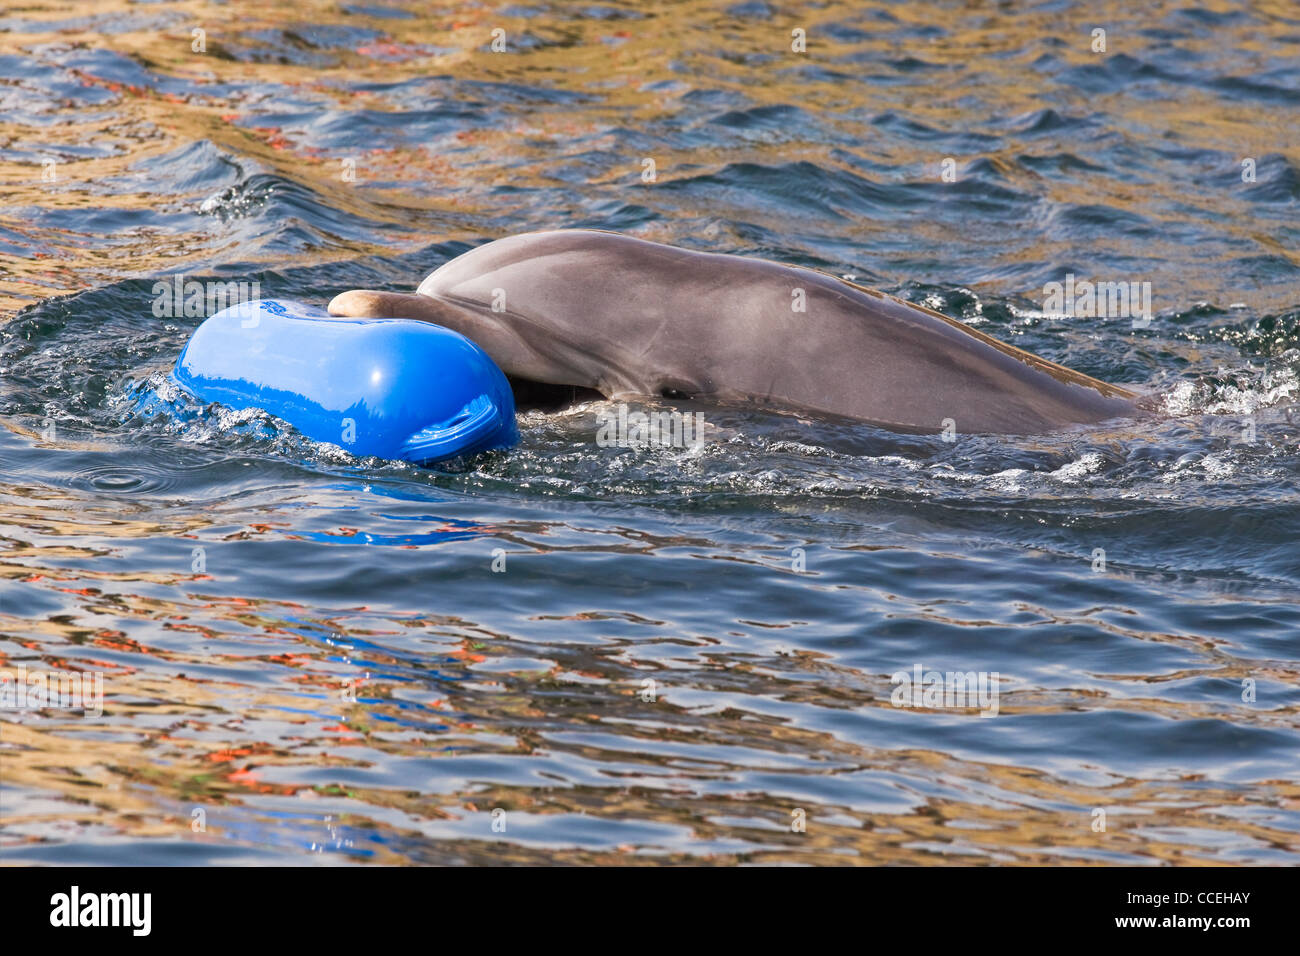 Bottlenose dolphin or Tursiops truncatus playing in the water Stock Photo